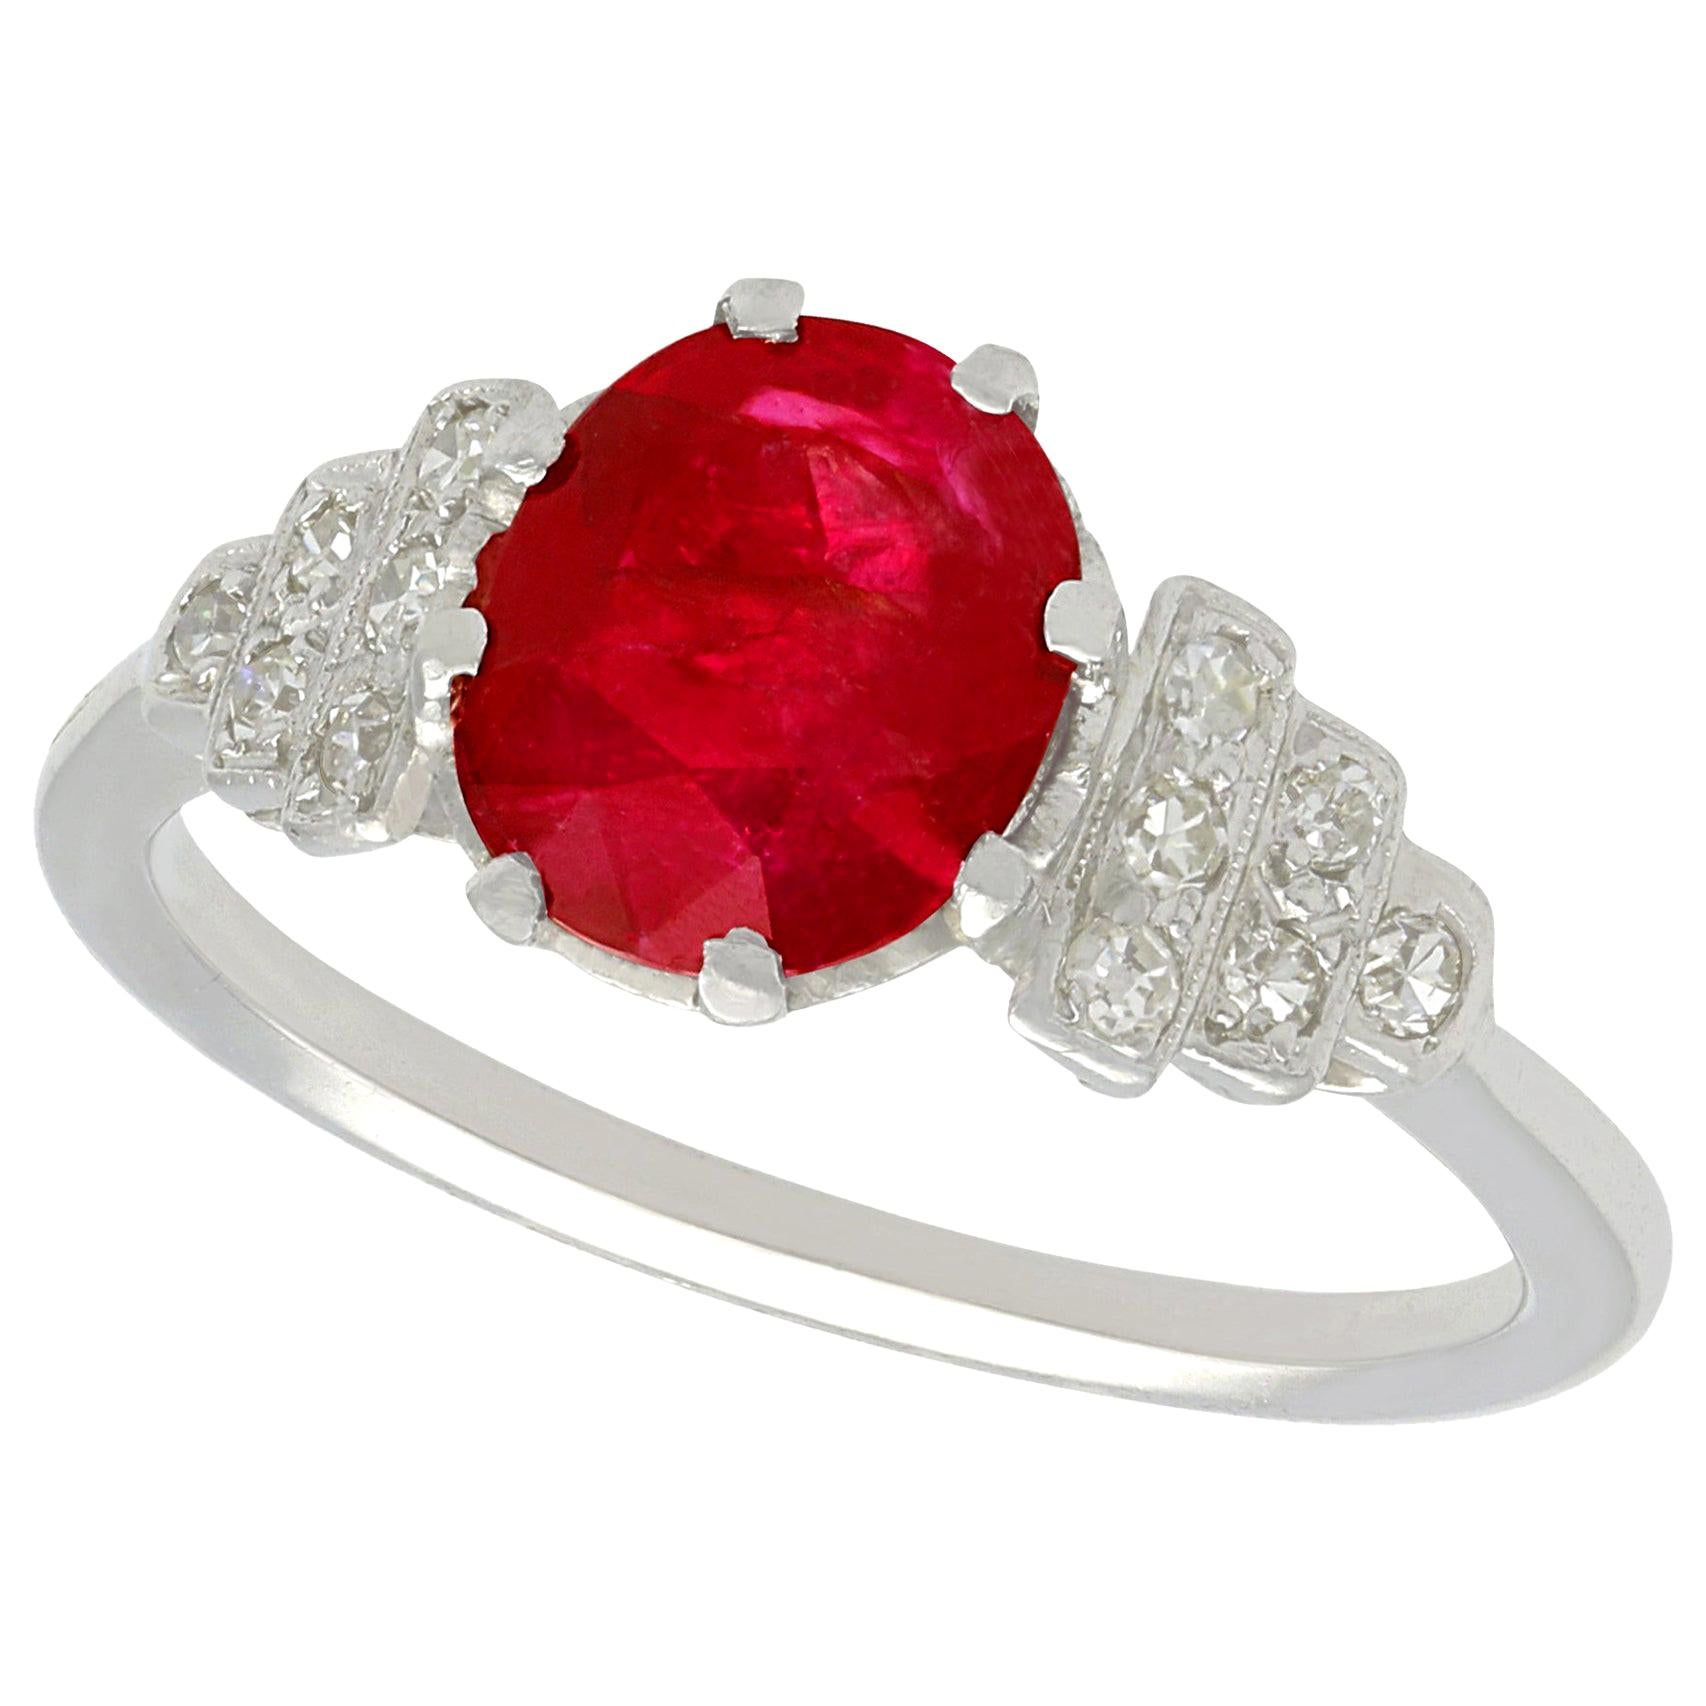 Antique French 1.80 Carat Ruby and Diamond White Gold Cocktail Ring